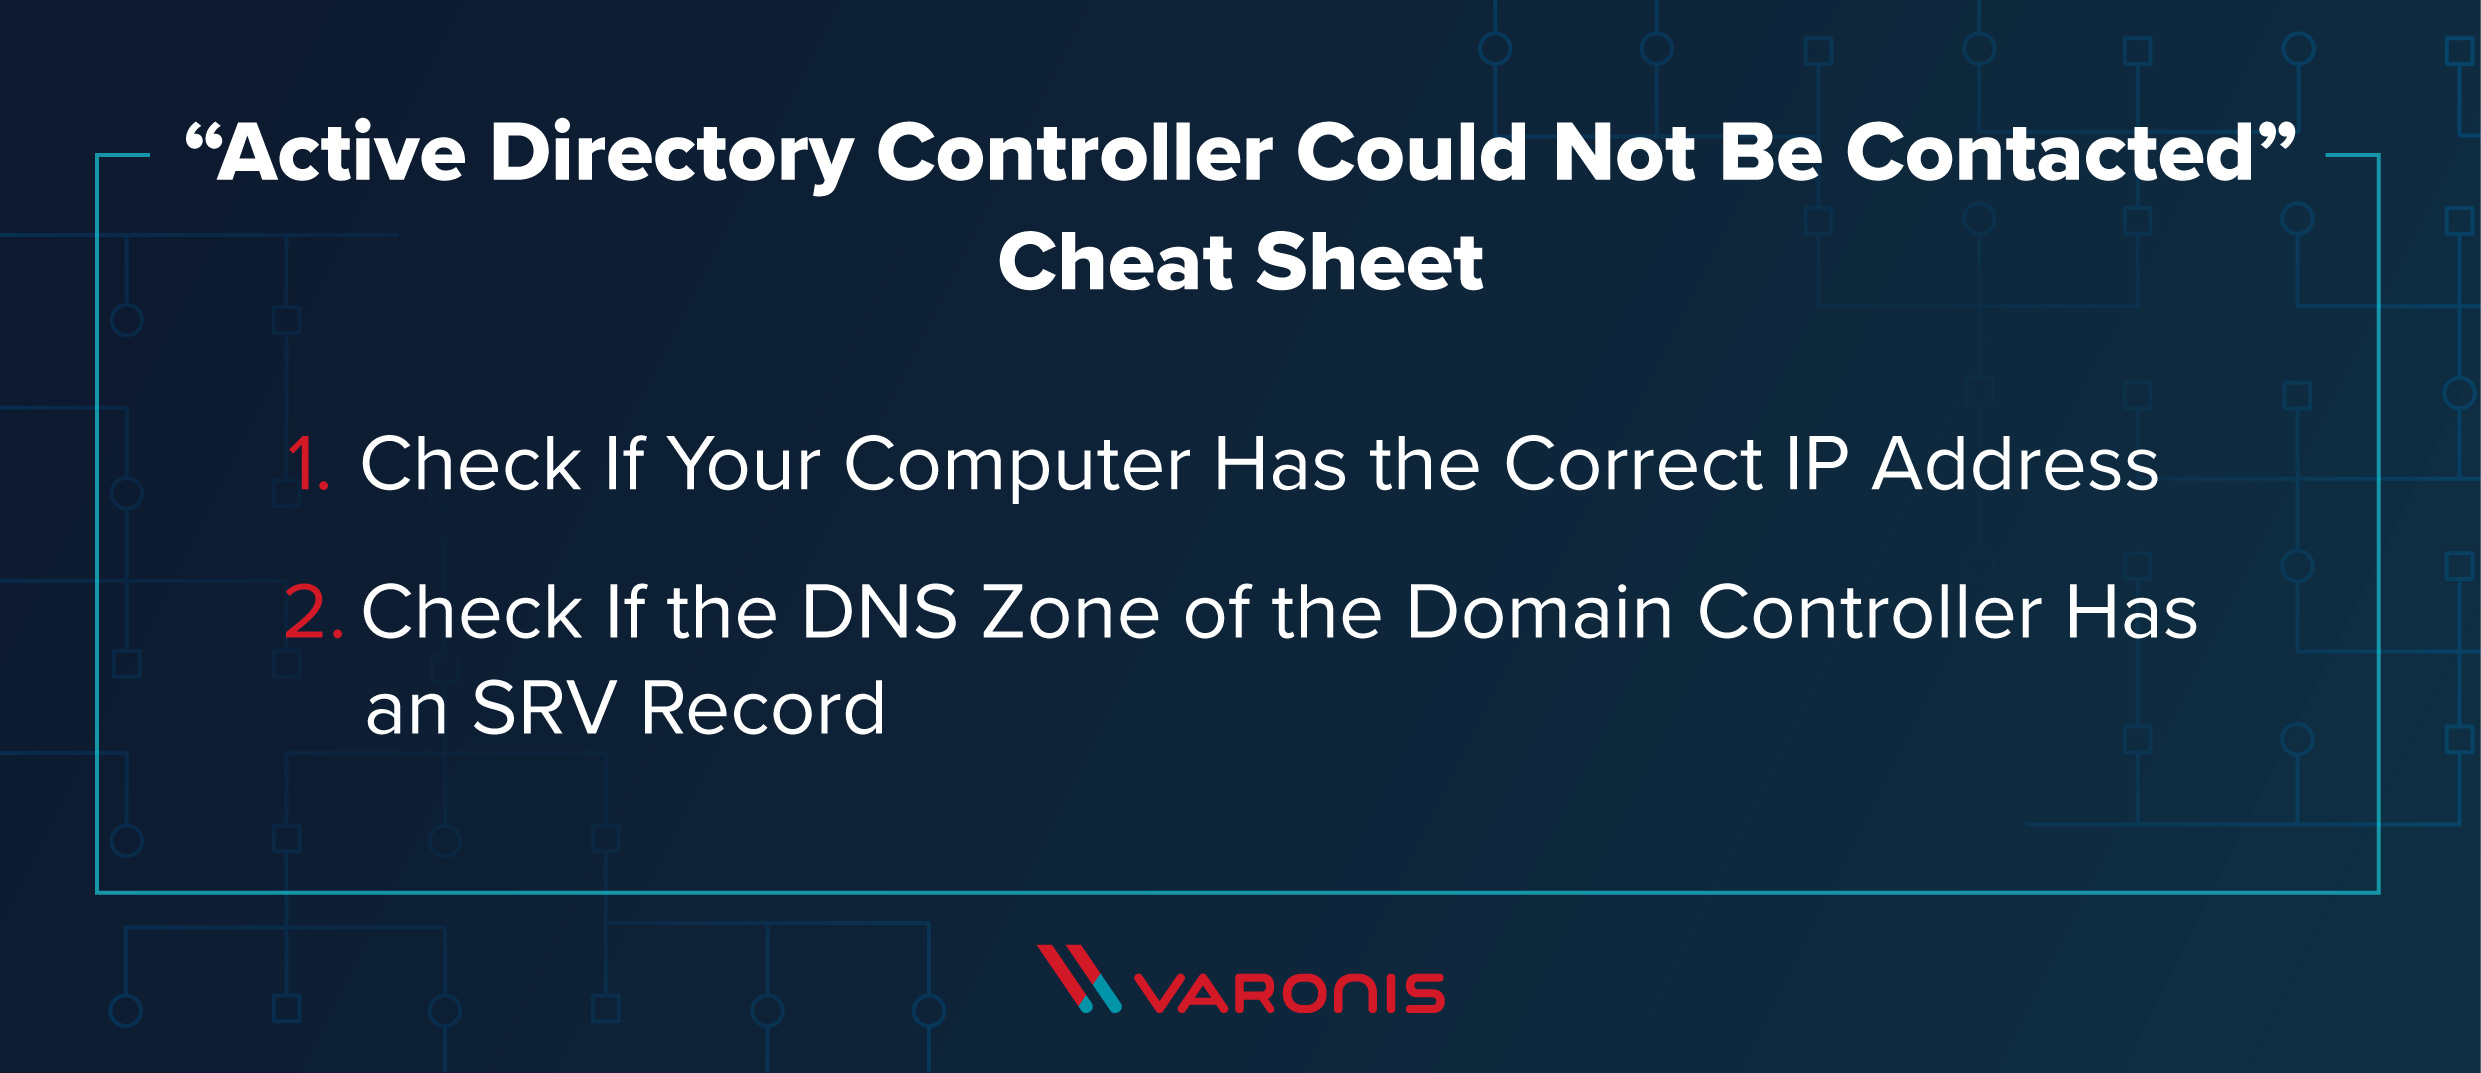 active directory controller could not be contacted cheat sheet